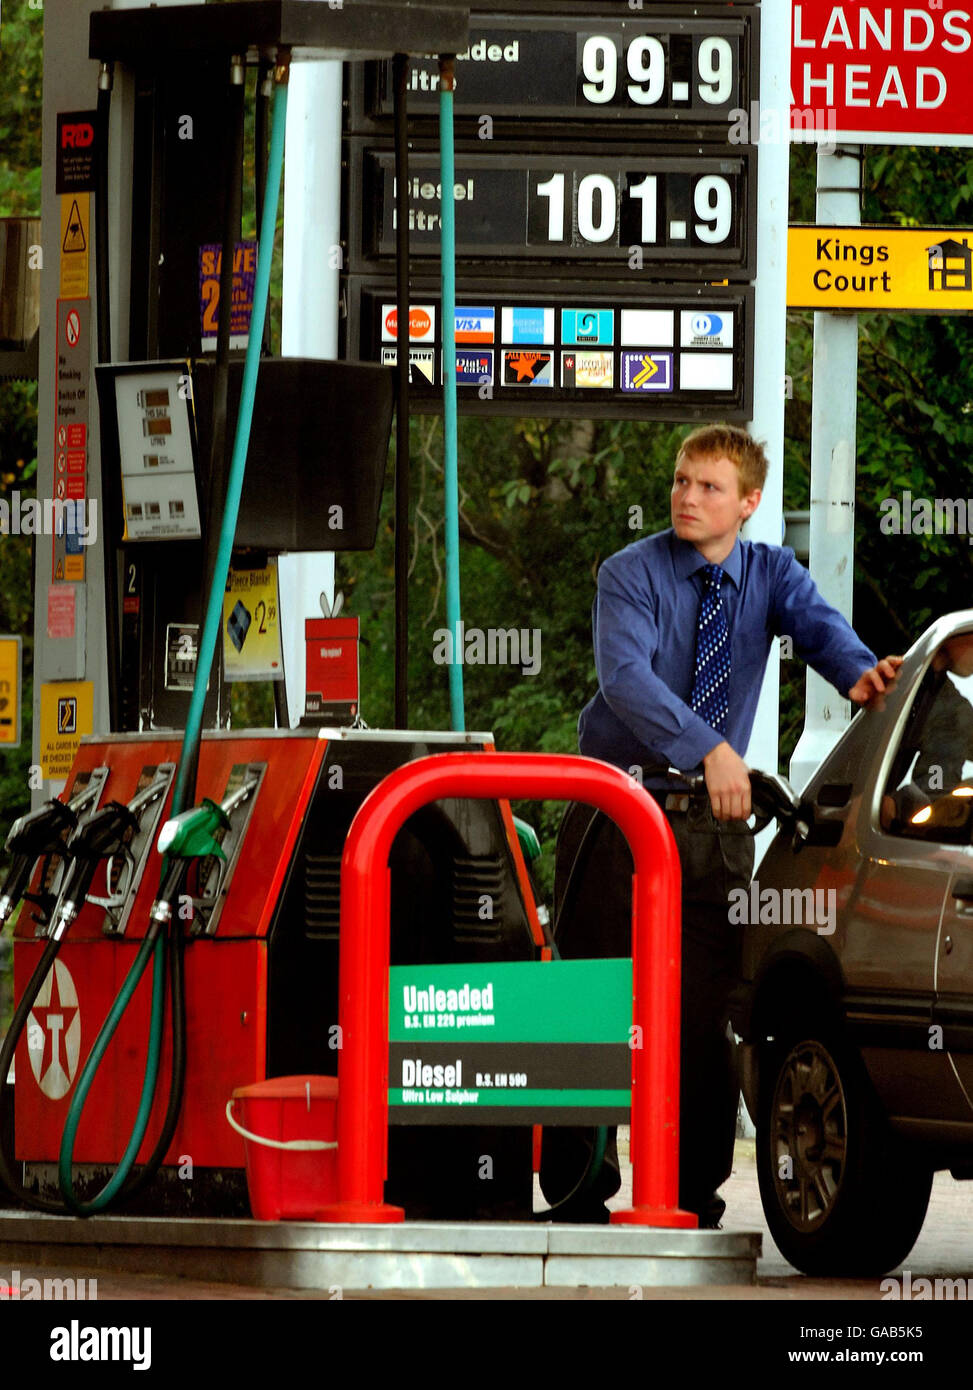 A motorist refuels at a petrol station in Ashby de la Zouch, Leicetsershire. The new prices of fuel can be seen displayed on the forecourt with diesel fuel at 1.01 a litre and unleaded fuel 99.9 pence a litre. Stock Photo